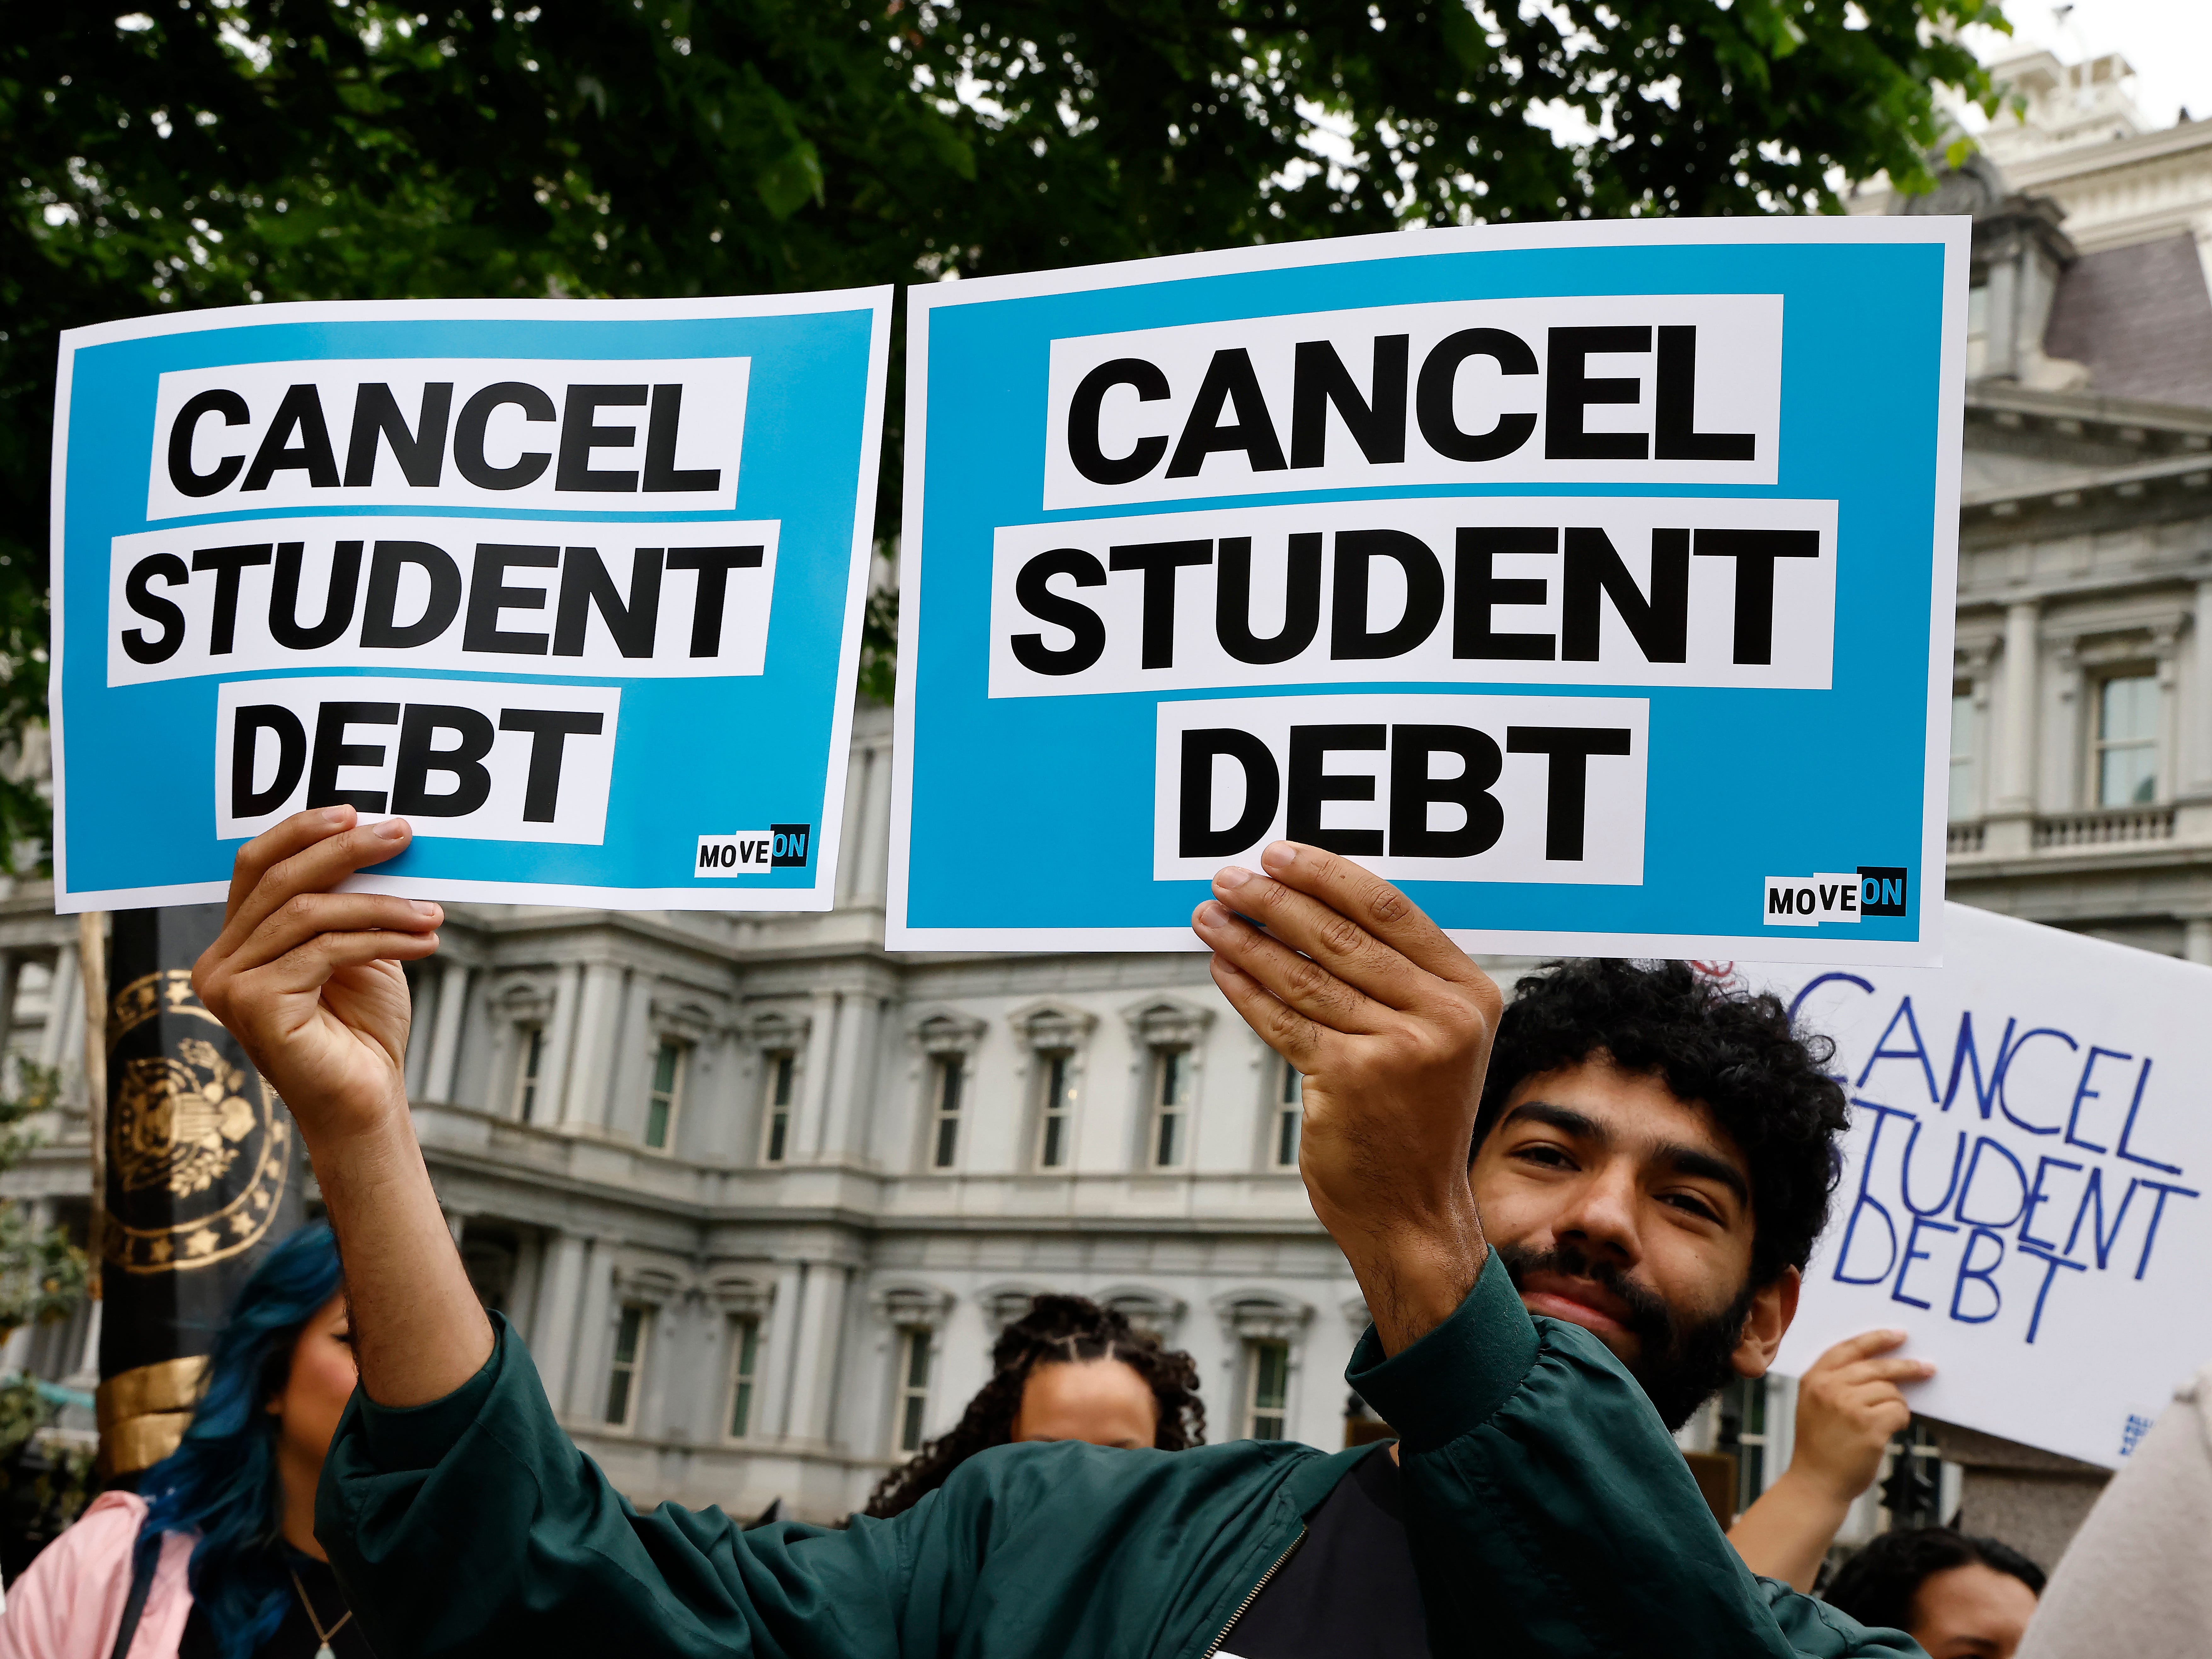 Man holds up two signs that read "CANCEL STUDENT DEBT"